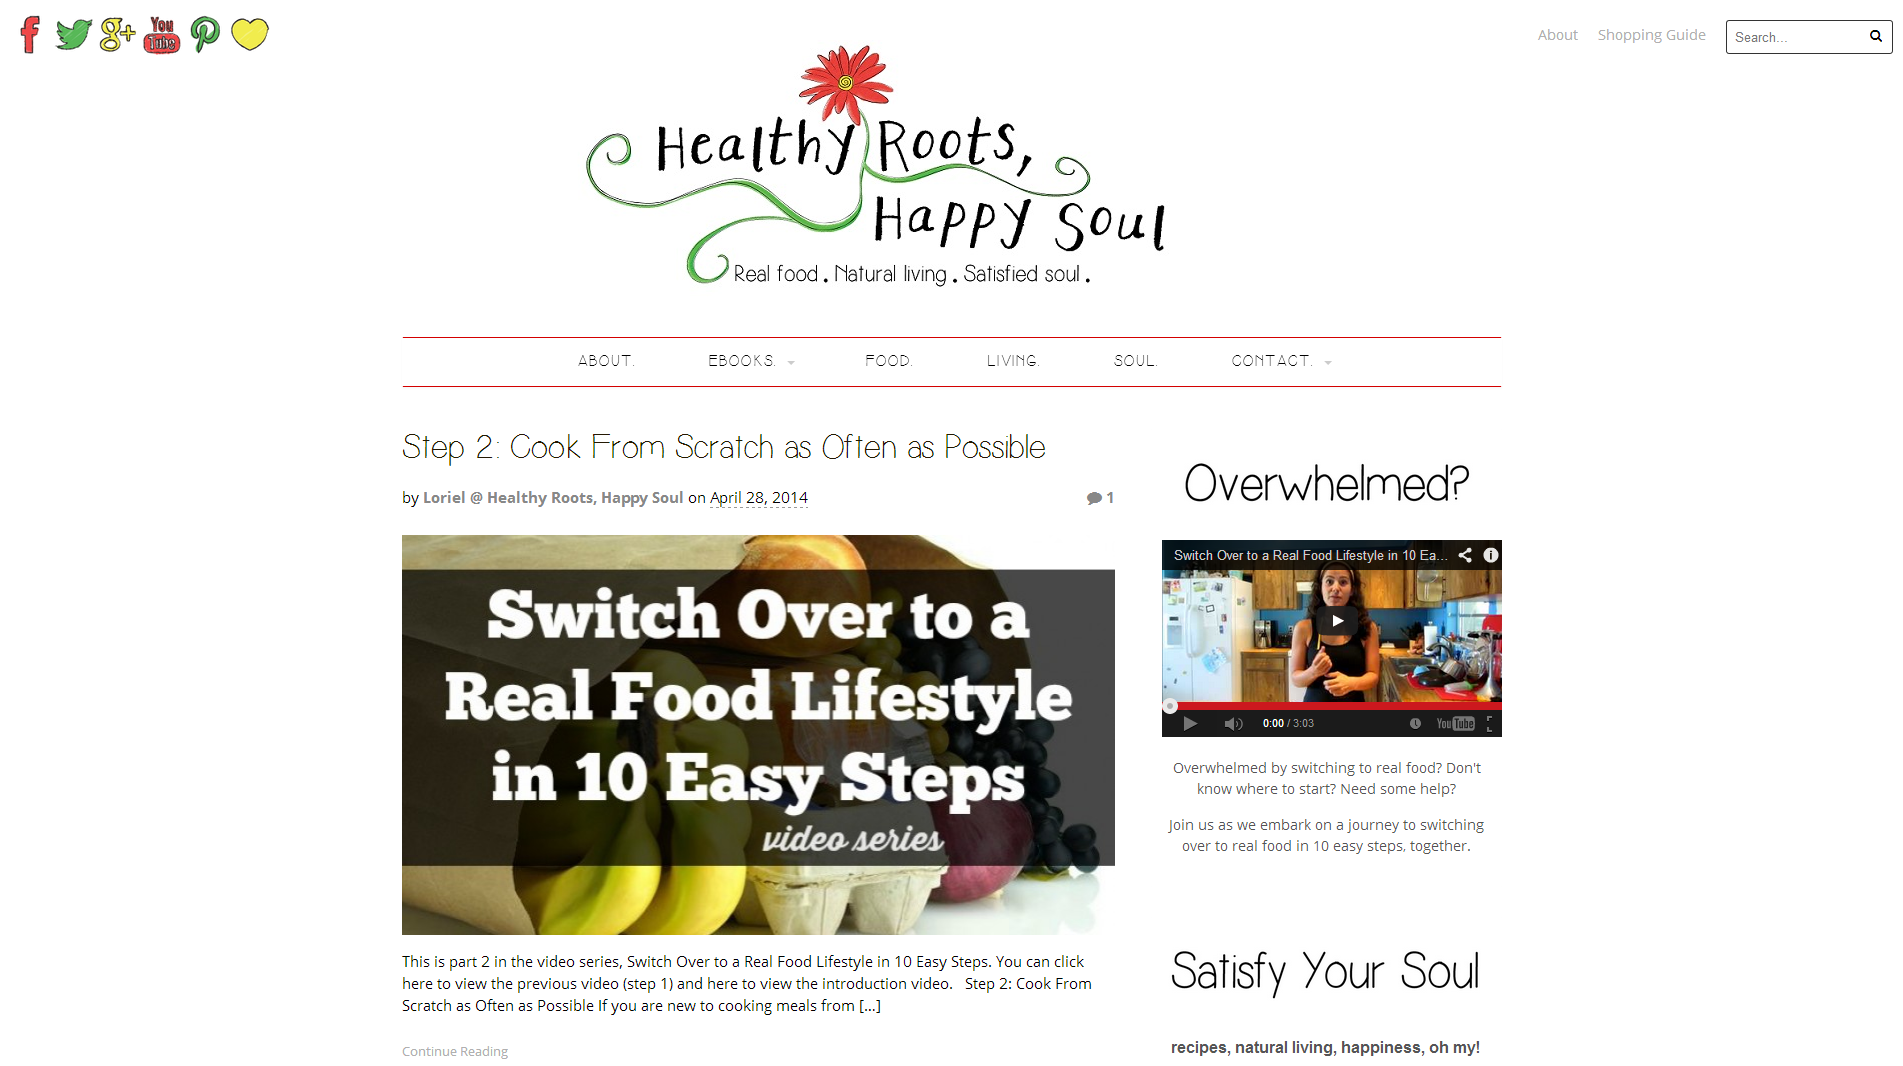 Healthy Roots Happy Soul | oncecoupled.com